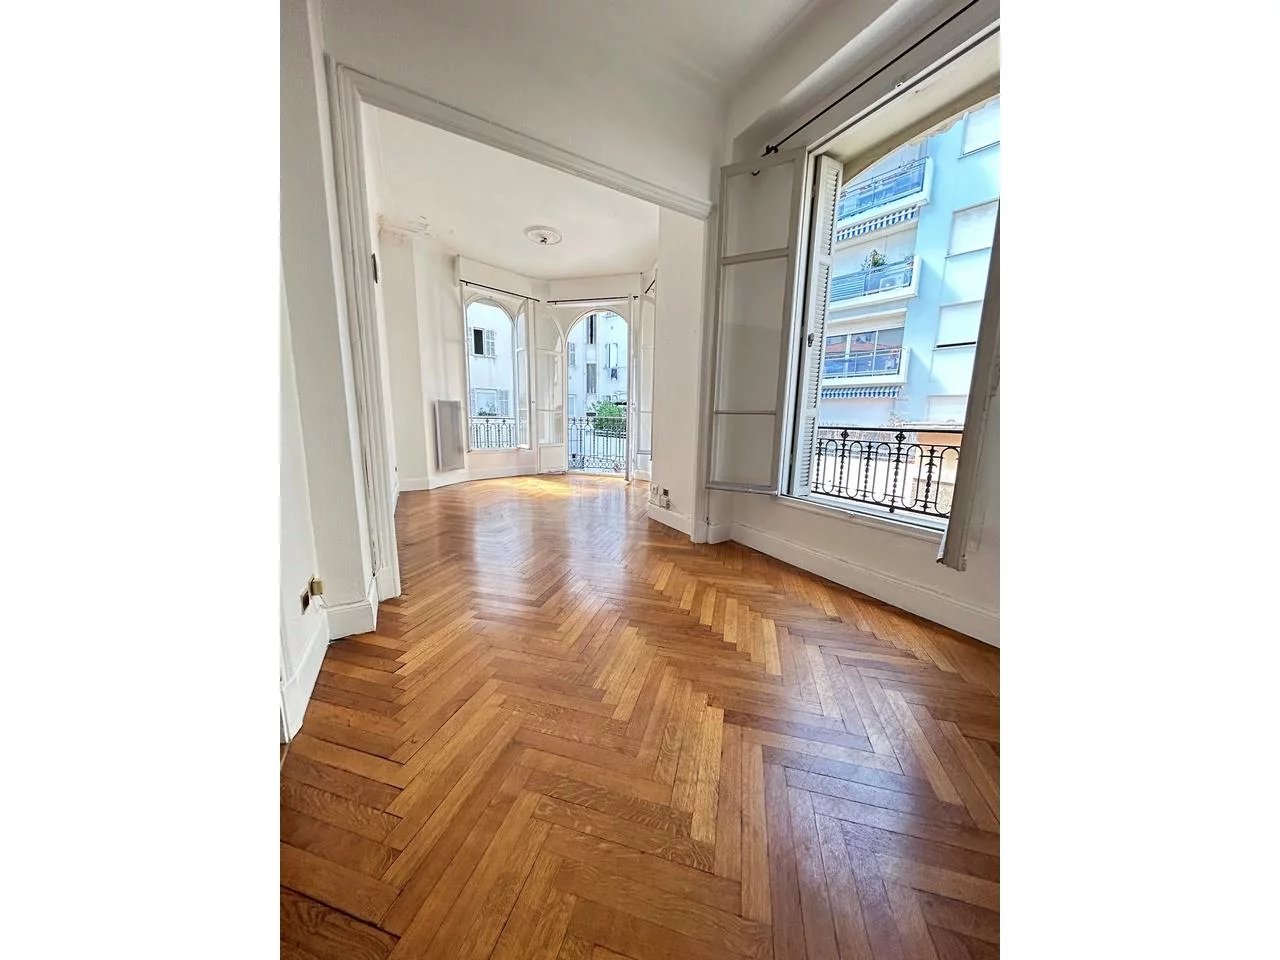 Appartement  2 Rooms 55m2  for sale   250 000 €